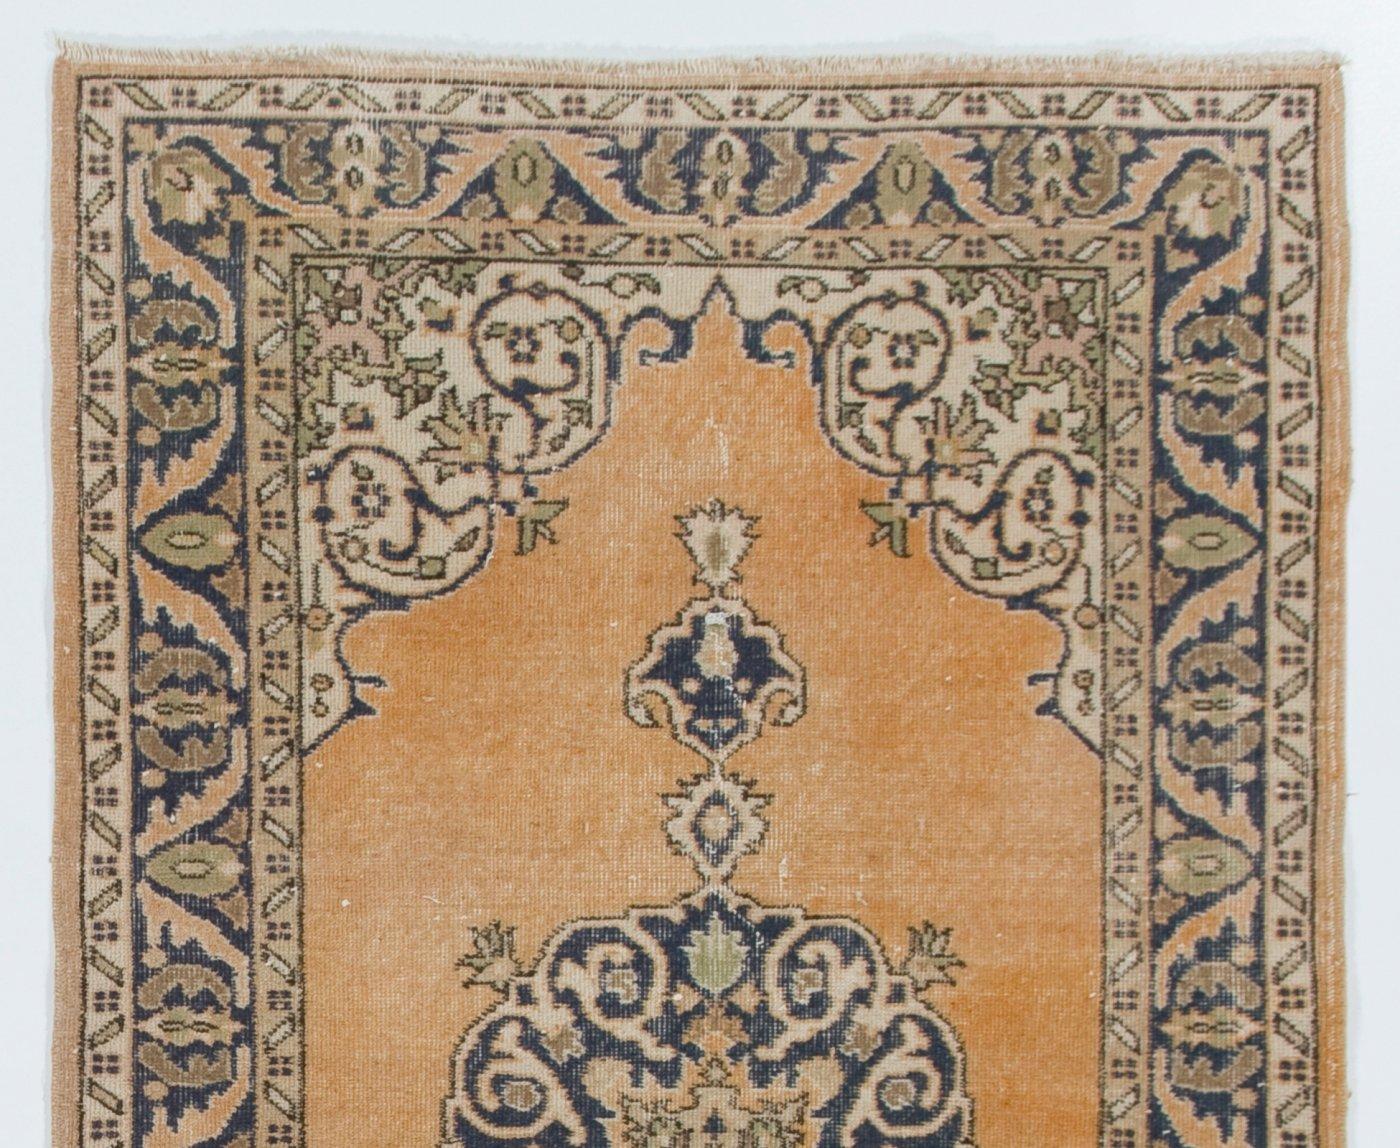 A vintage rug from Central Turkey, finely hand-knotted with even medium wool pile on cotton foundation. It features a classical medallion design in indigo against a soft orange field framed by arabesque corner pieces in beige and a border filled